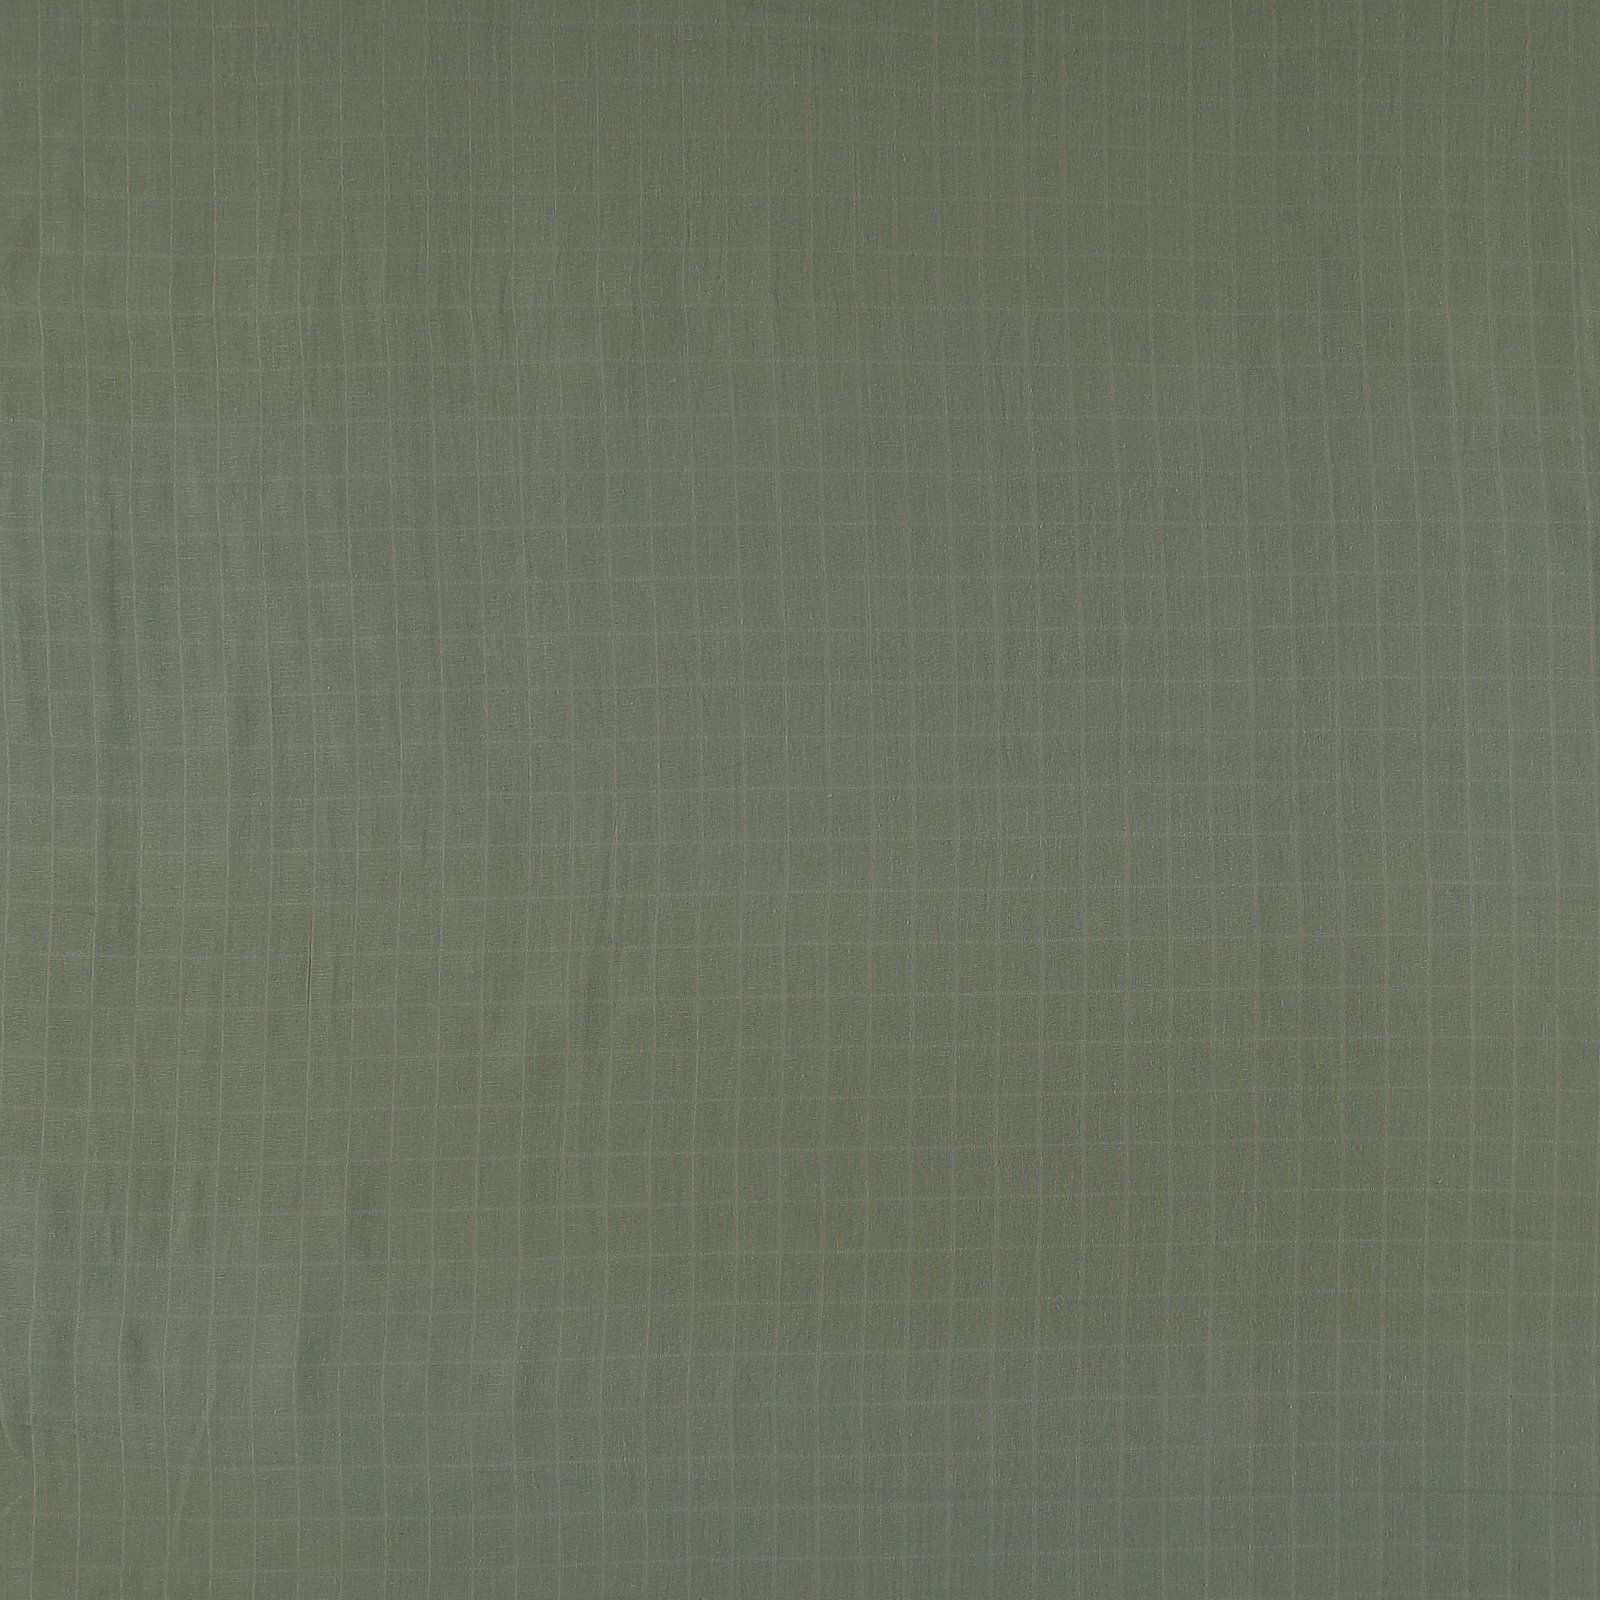 Muslin 2-layers light dusty green 501708_pack_solid